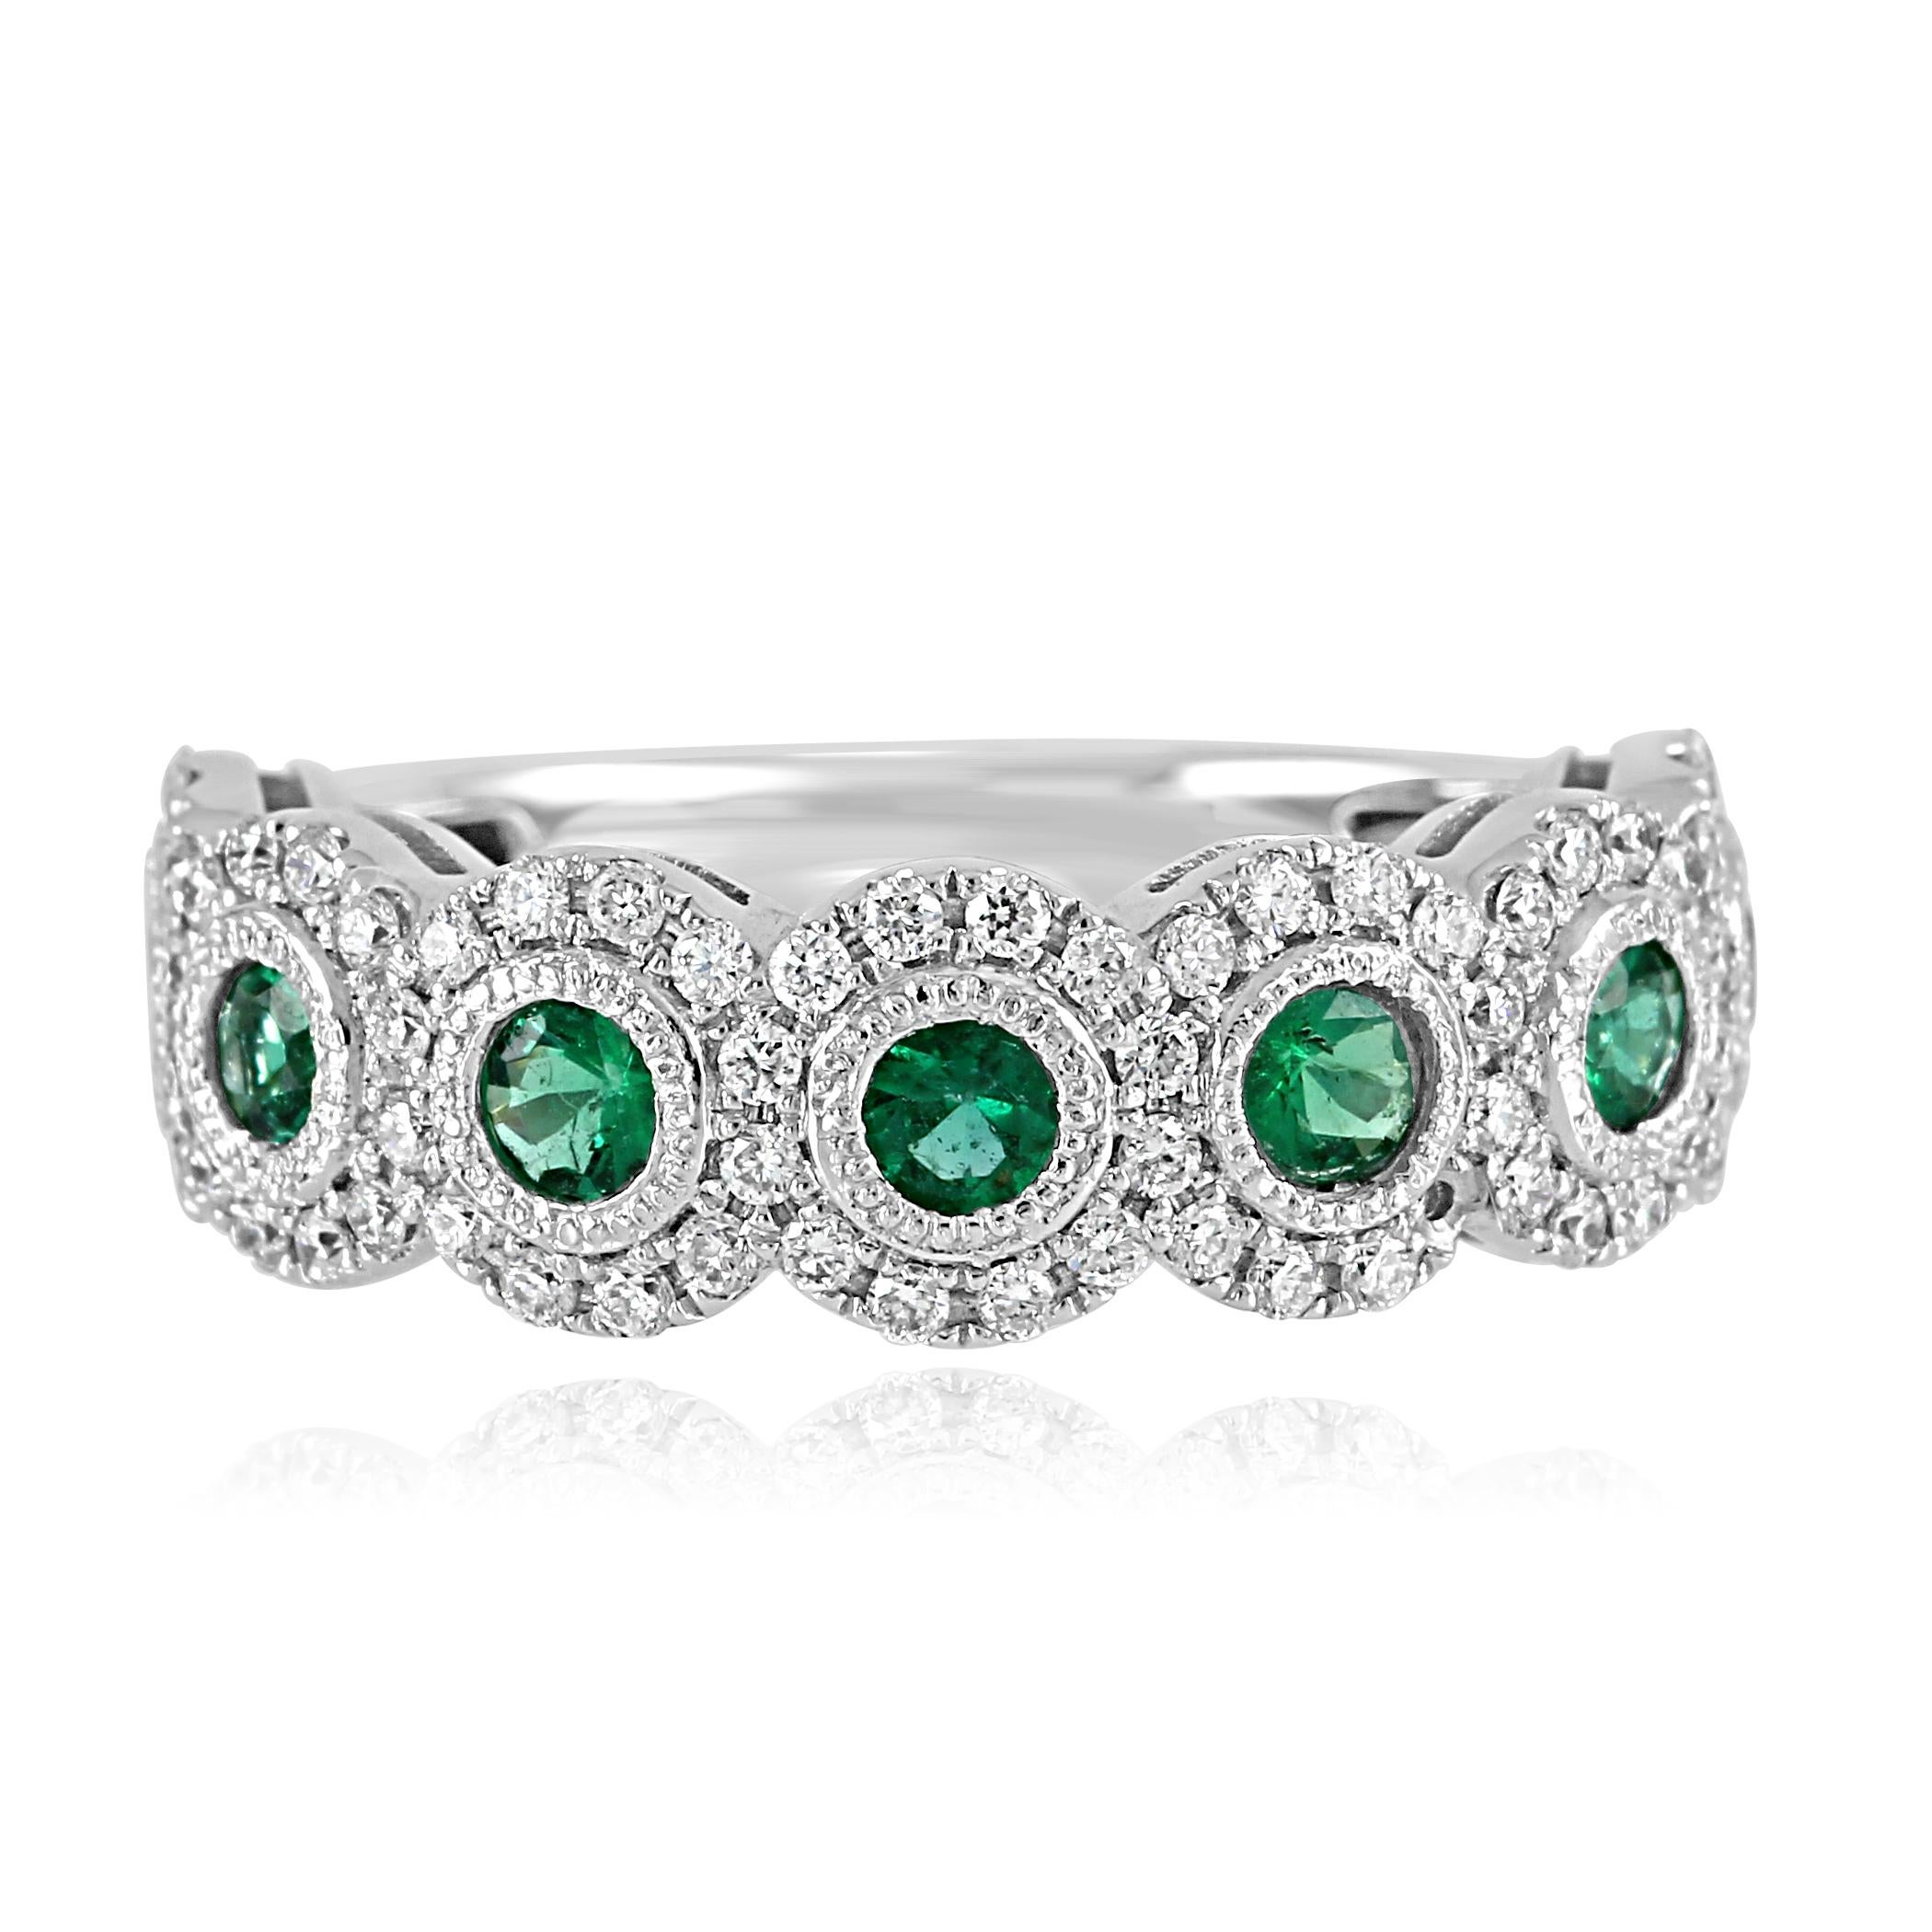 7 Emerald Round 0.61 Carat in a halo of white diamond 0.5O carat in 14k White Gold Stackable Fashion Cocktail  Band Ring.

Emerald Round Weight 0.61 Carat
Total Weight 1.11 Carat